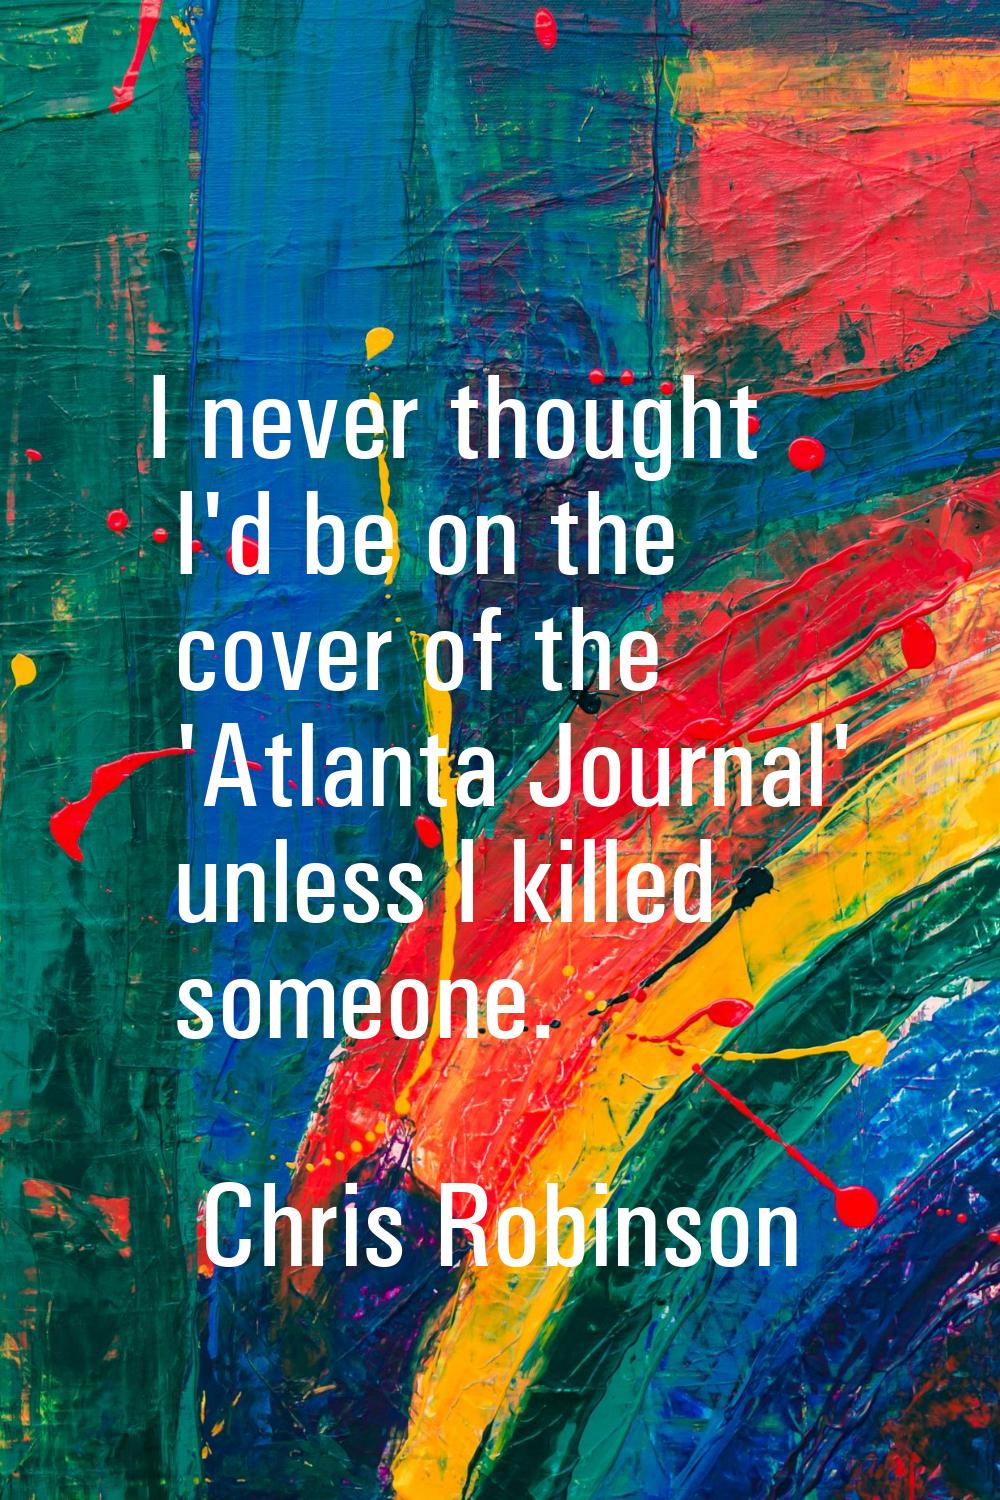 I never thought I'd be on the cover of the 'Atlanta Journal' unless I killed someone.